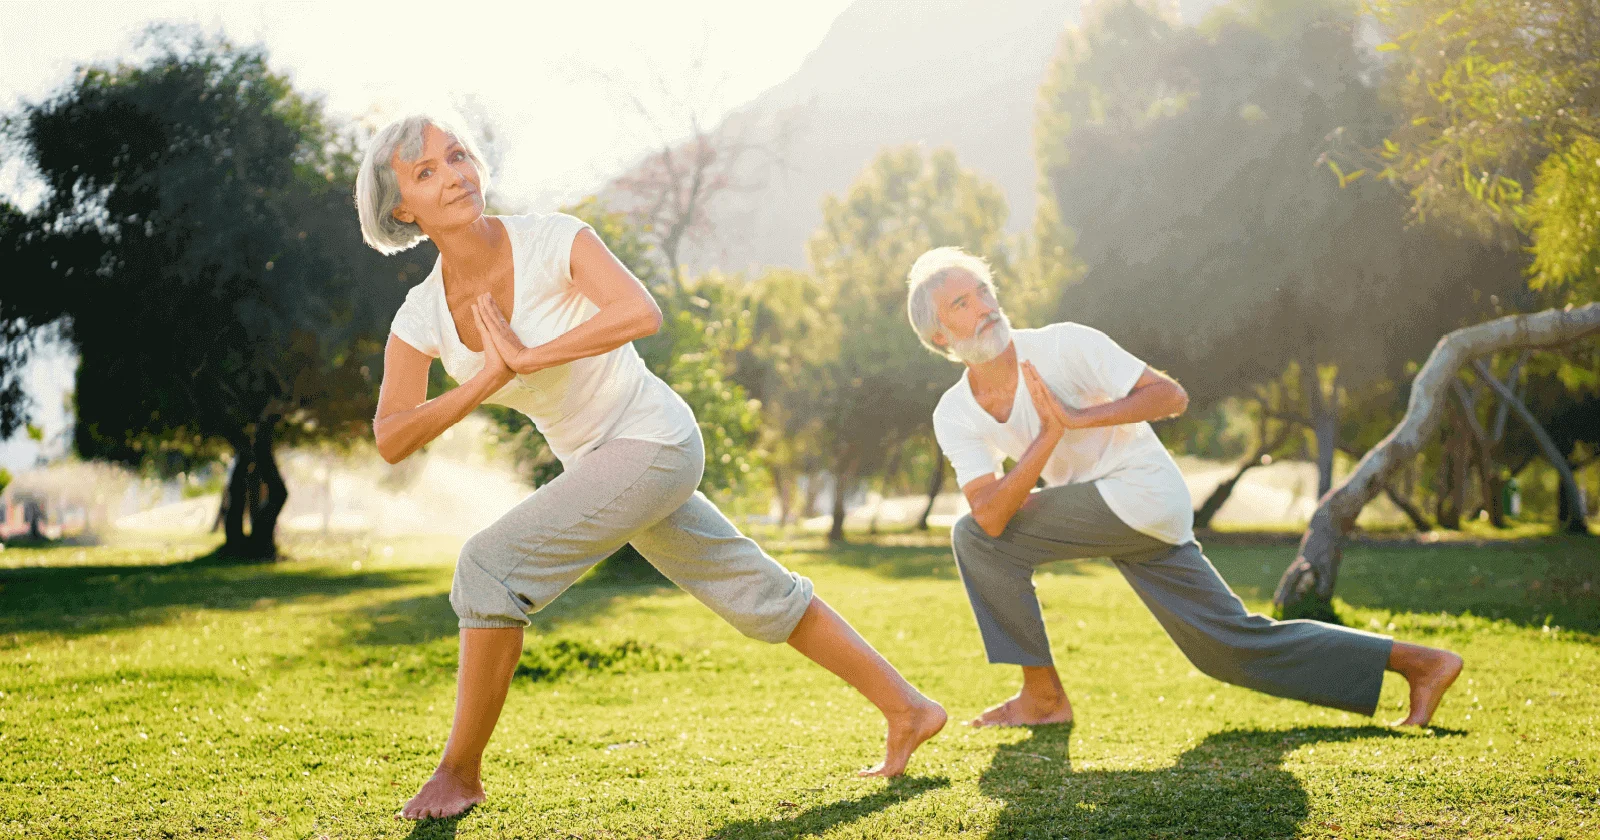 The importance of maintaining an active lifestyle in old age
